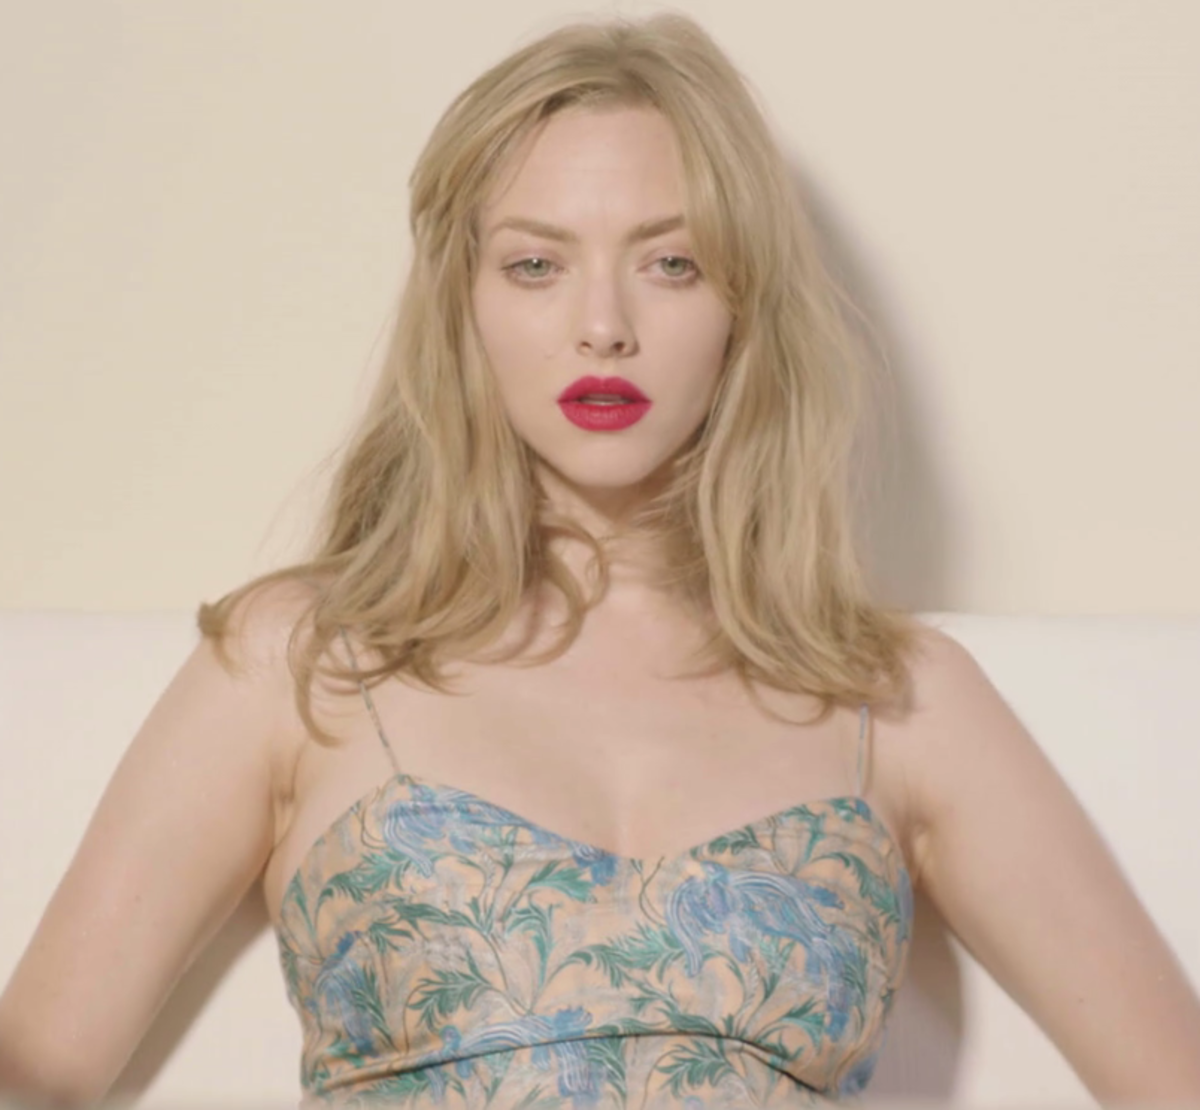 Amanda Seyfried in a photoshoot for Vogue.